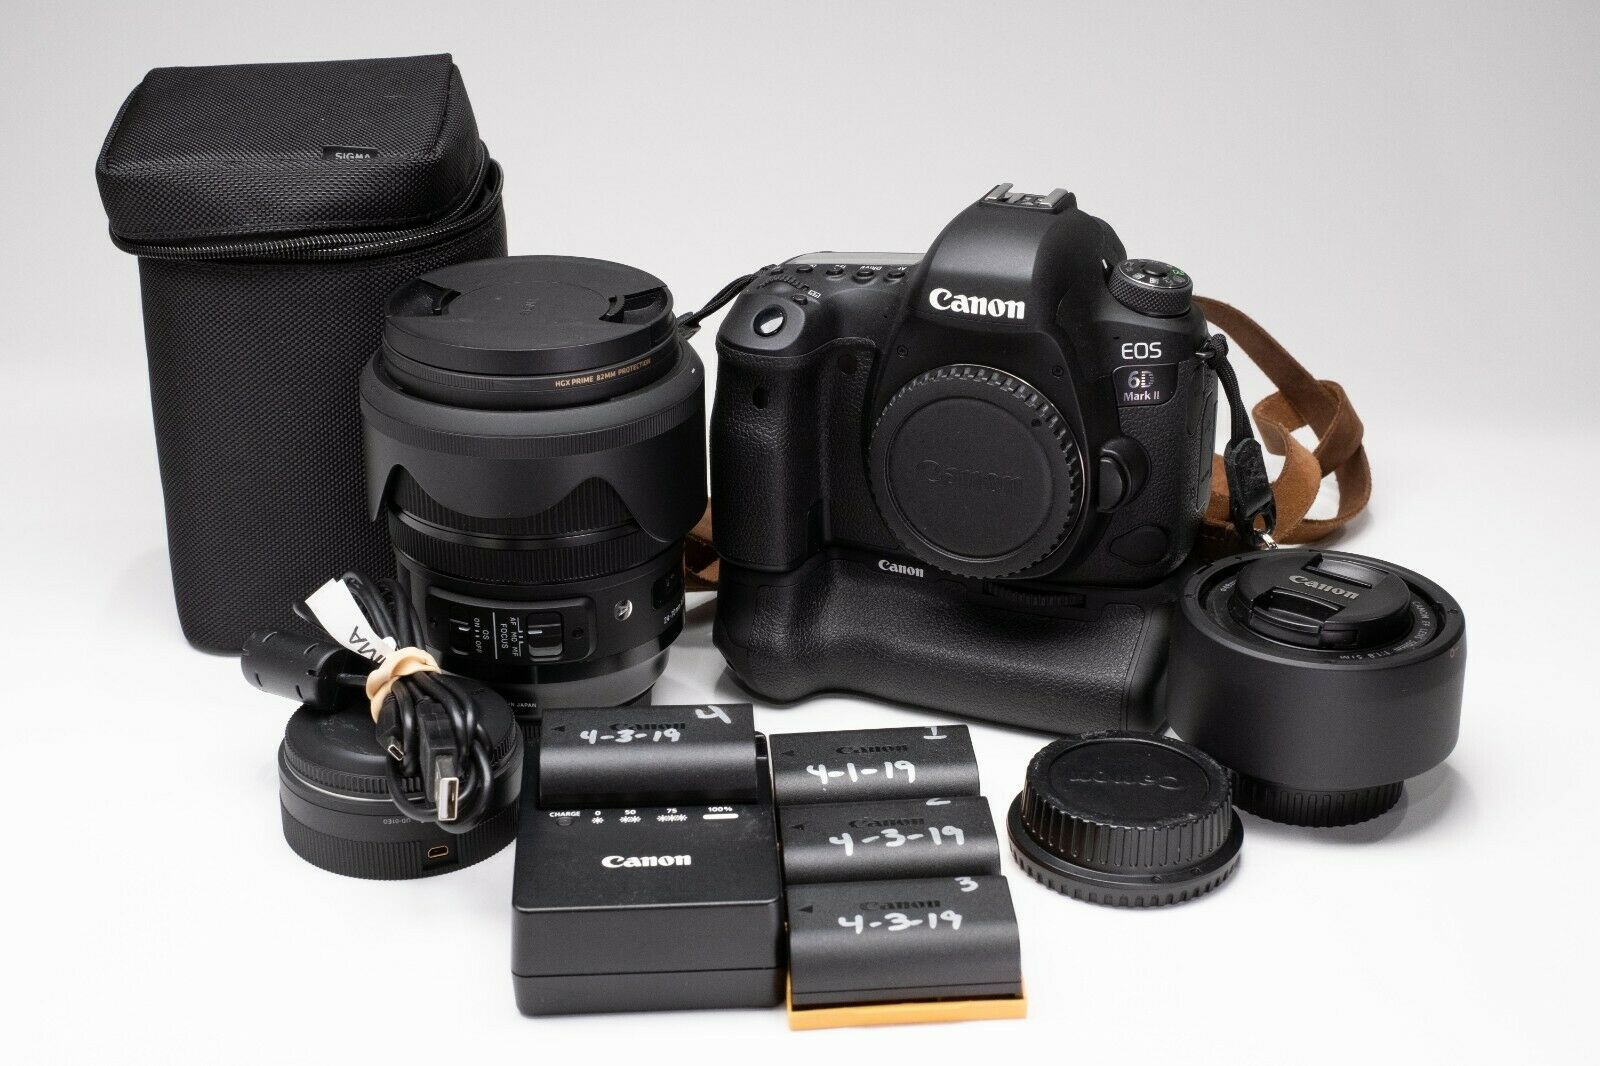 Canon EOS 6D Mark II, Grip, Batteries, Sigma Art 24-70 f2.8 + Nifty Fifty lens - iCommerce on Web